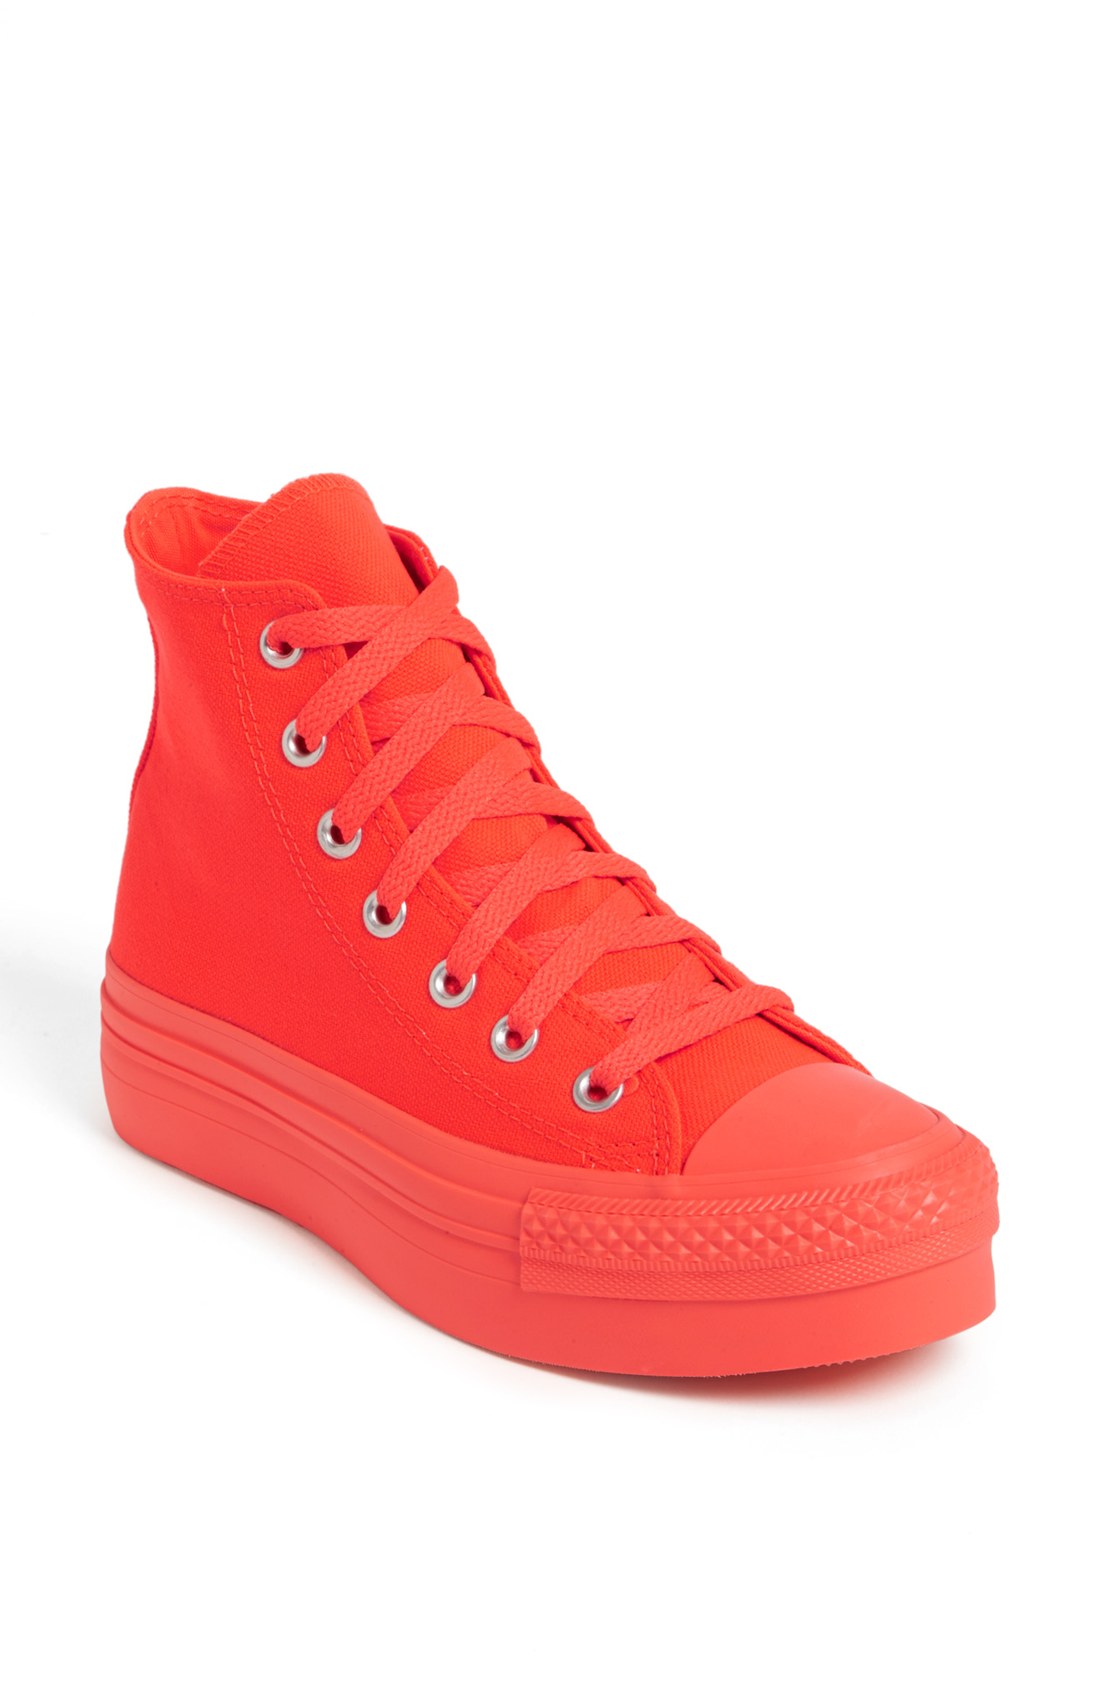 Converse Chuck Taylor All Star Platform High Top Sneaker in Red (Fiery ...